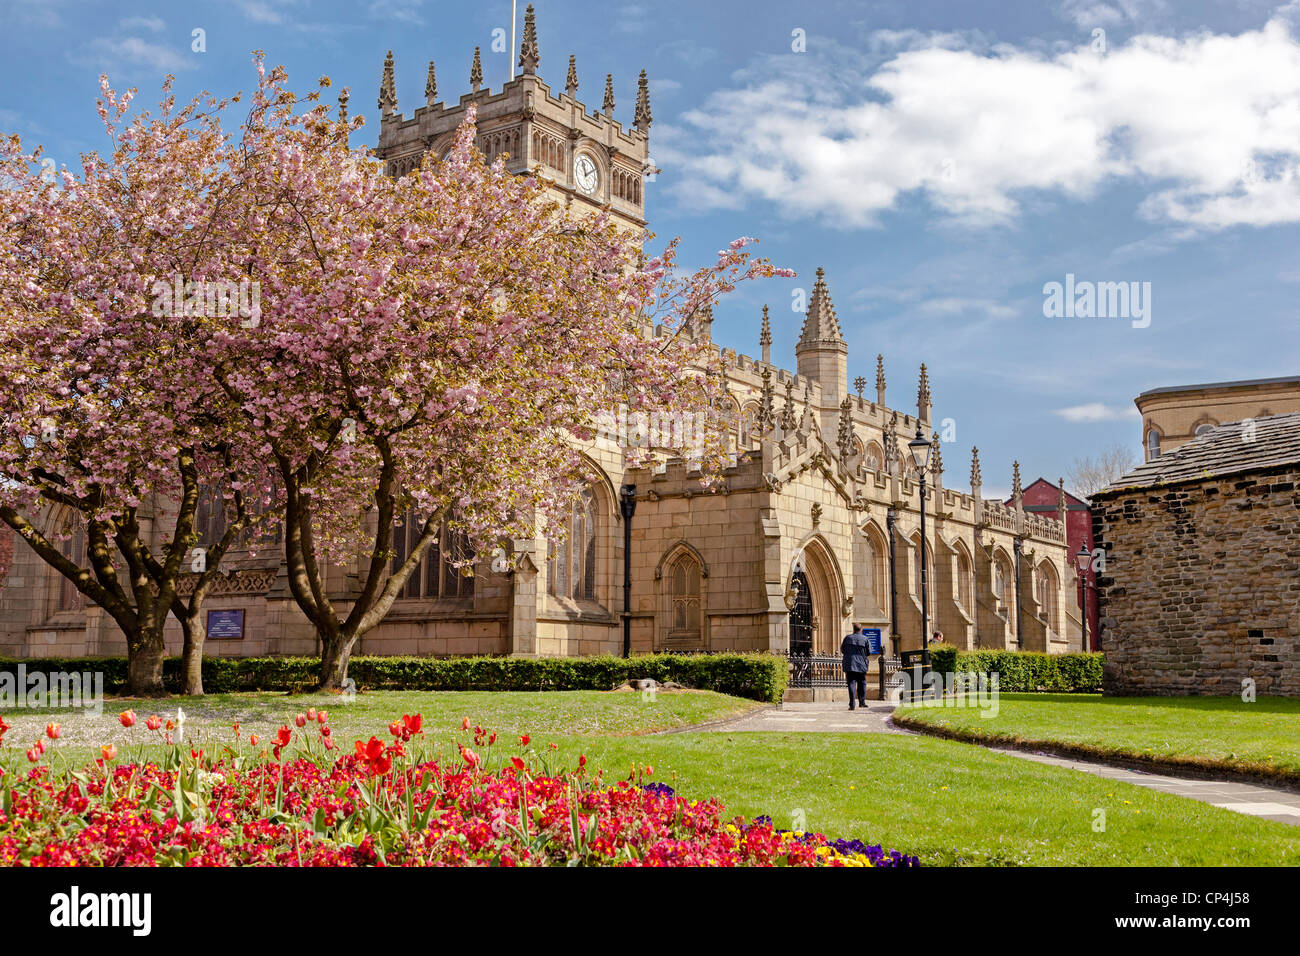 The Parish Church of All Saints Wigan. In the centre of the town. Stock Photo